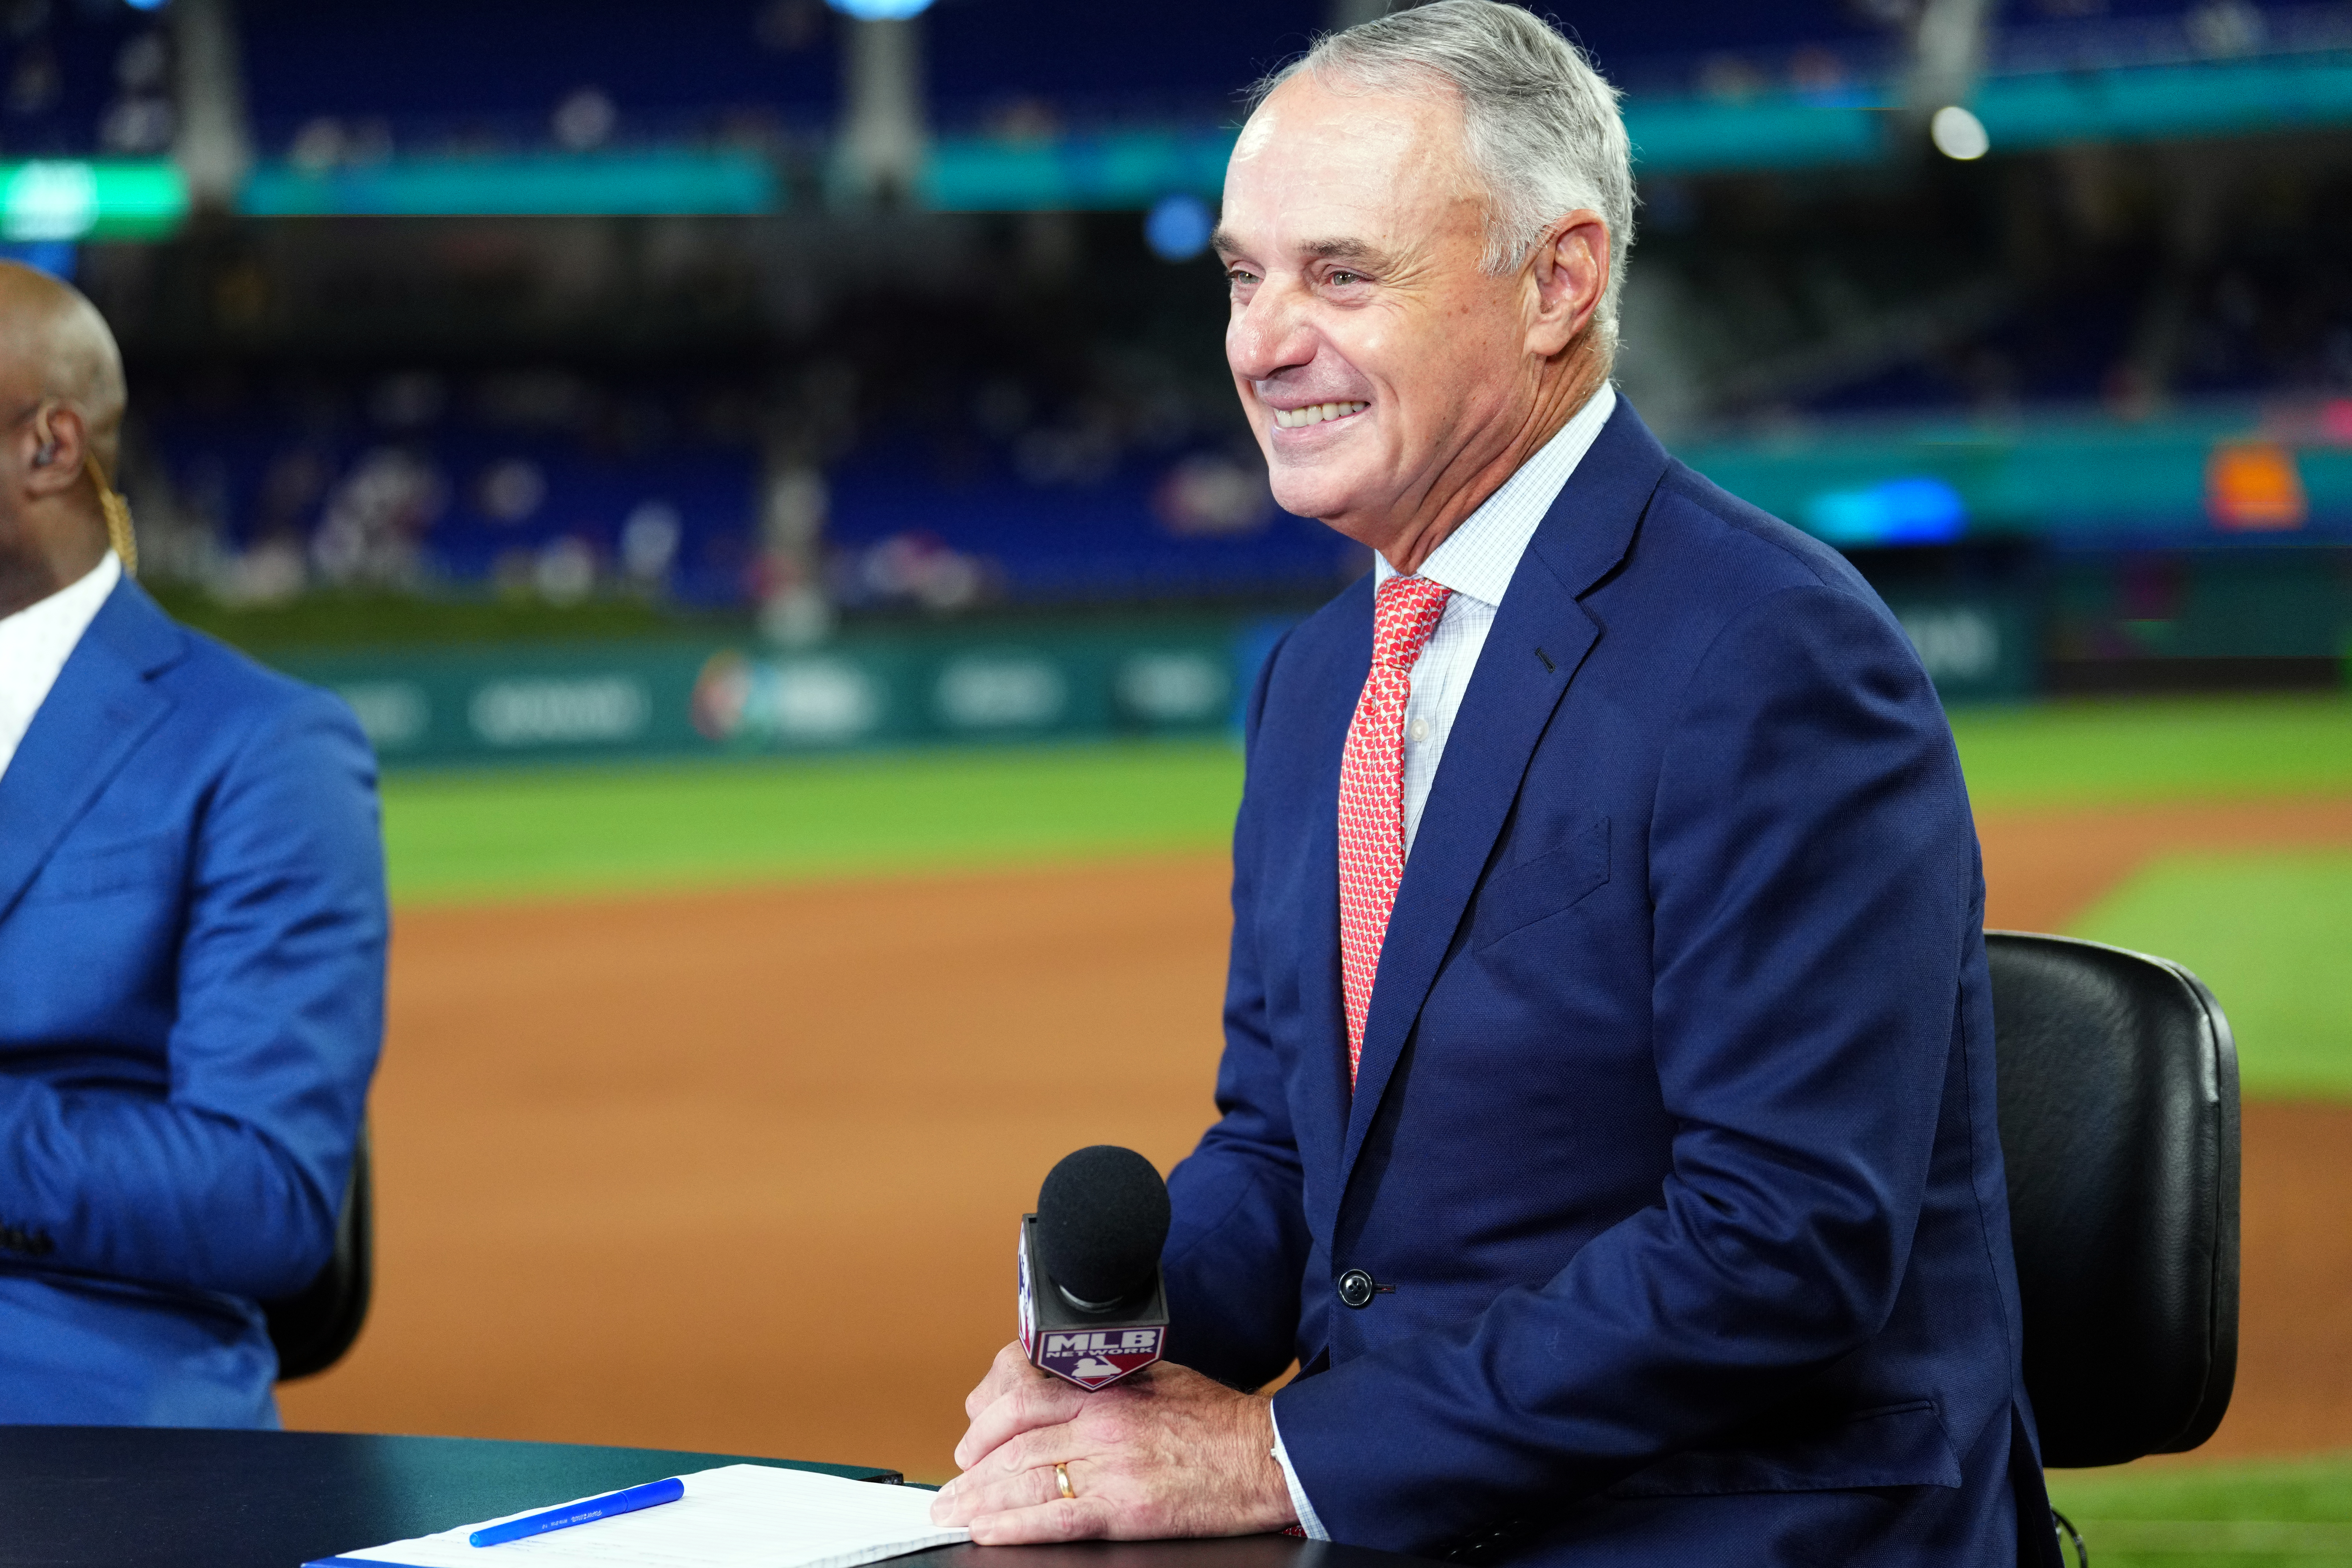 MLB commissioner Rob Manfred attends the MLB Network set prior to the World Baseball Classic Championship game between USA and Japan at LoanDepot Park in Miami, Florida, March 21, 2023. /CFP 